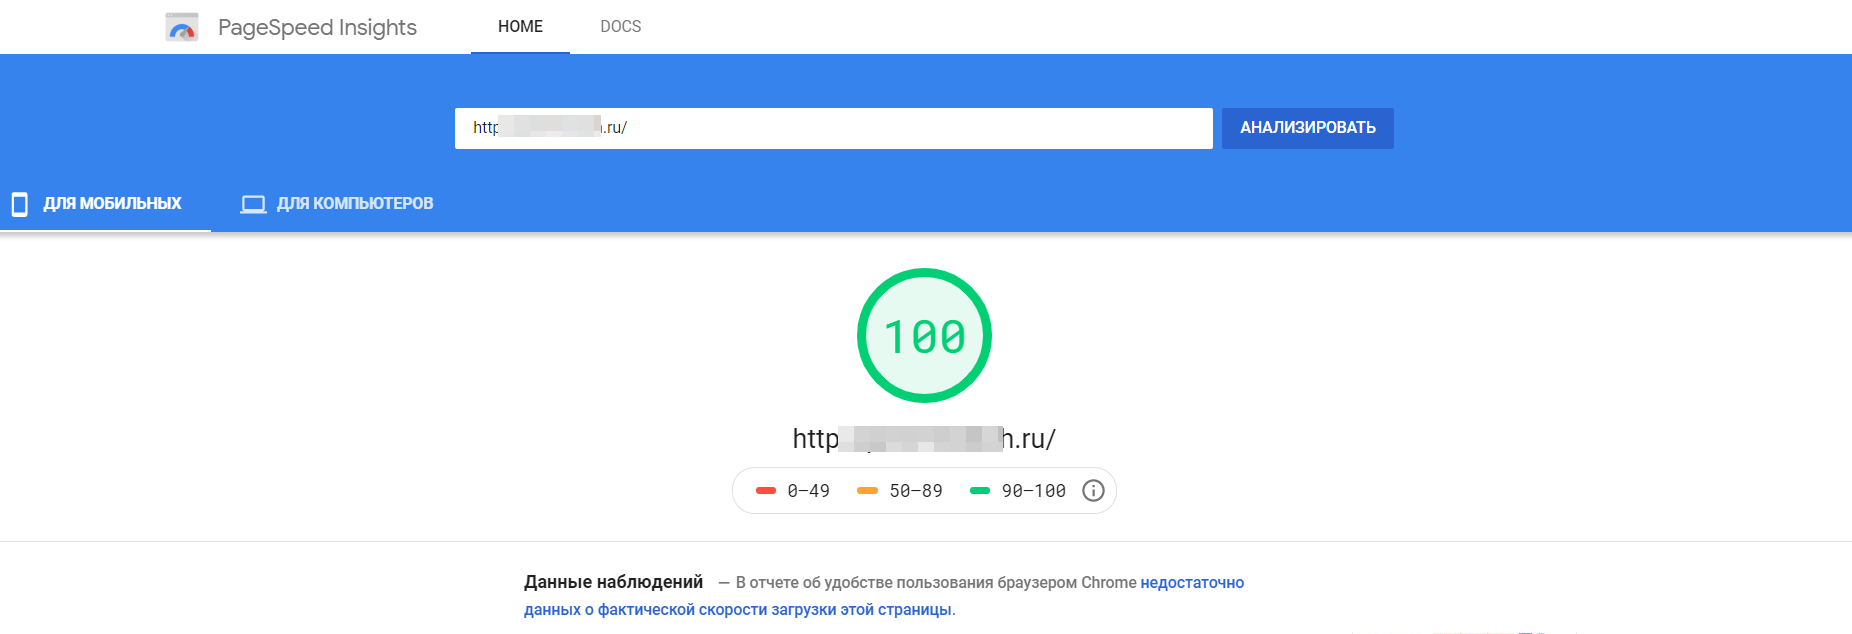 Google PageSpeed Insights test result, client's online store after optimization. The ideal result delivered by INITLAB.